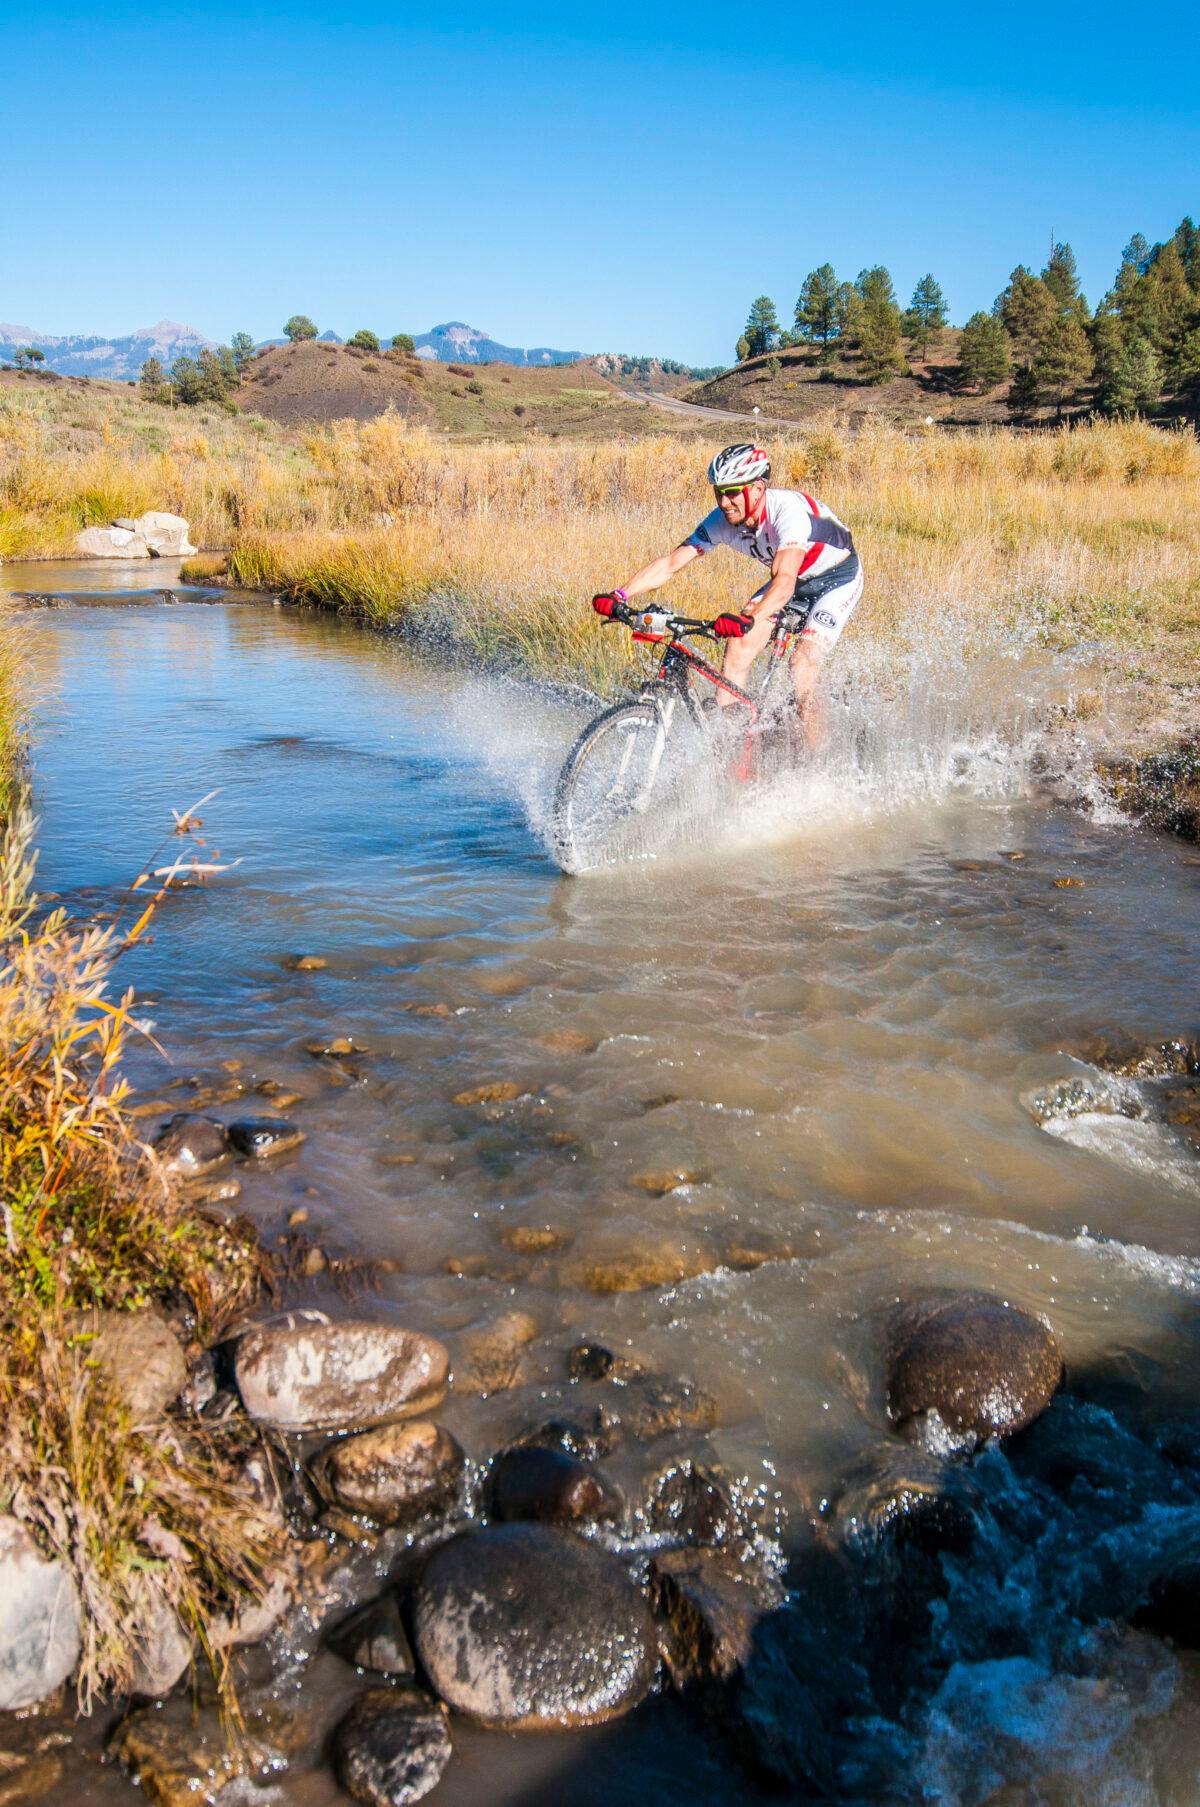 Mountain bikers will find many trails in the area. (Courtesy of Visit Pagosa Springs)